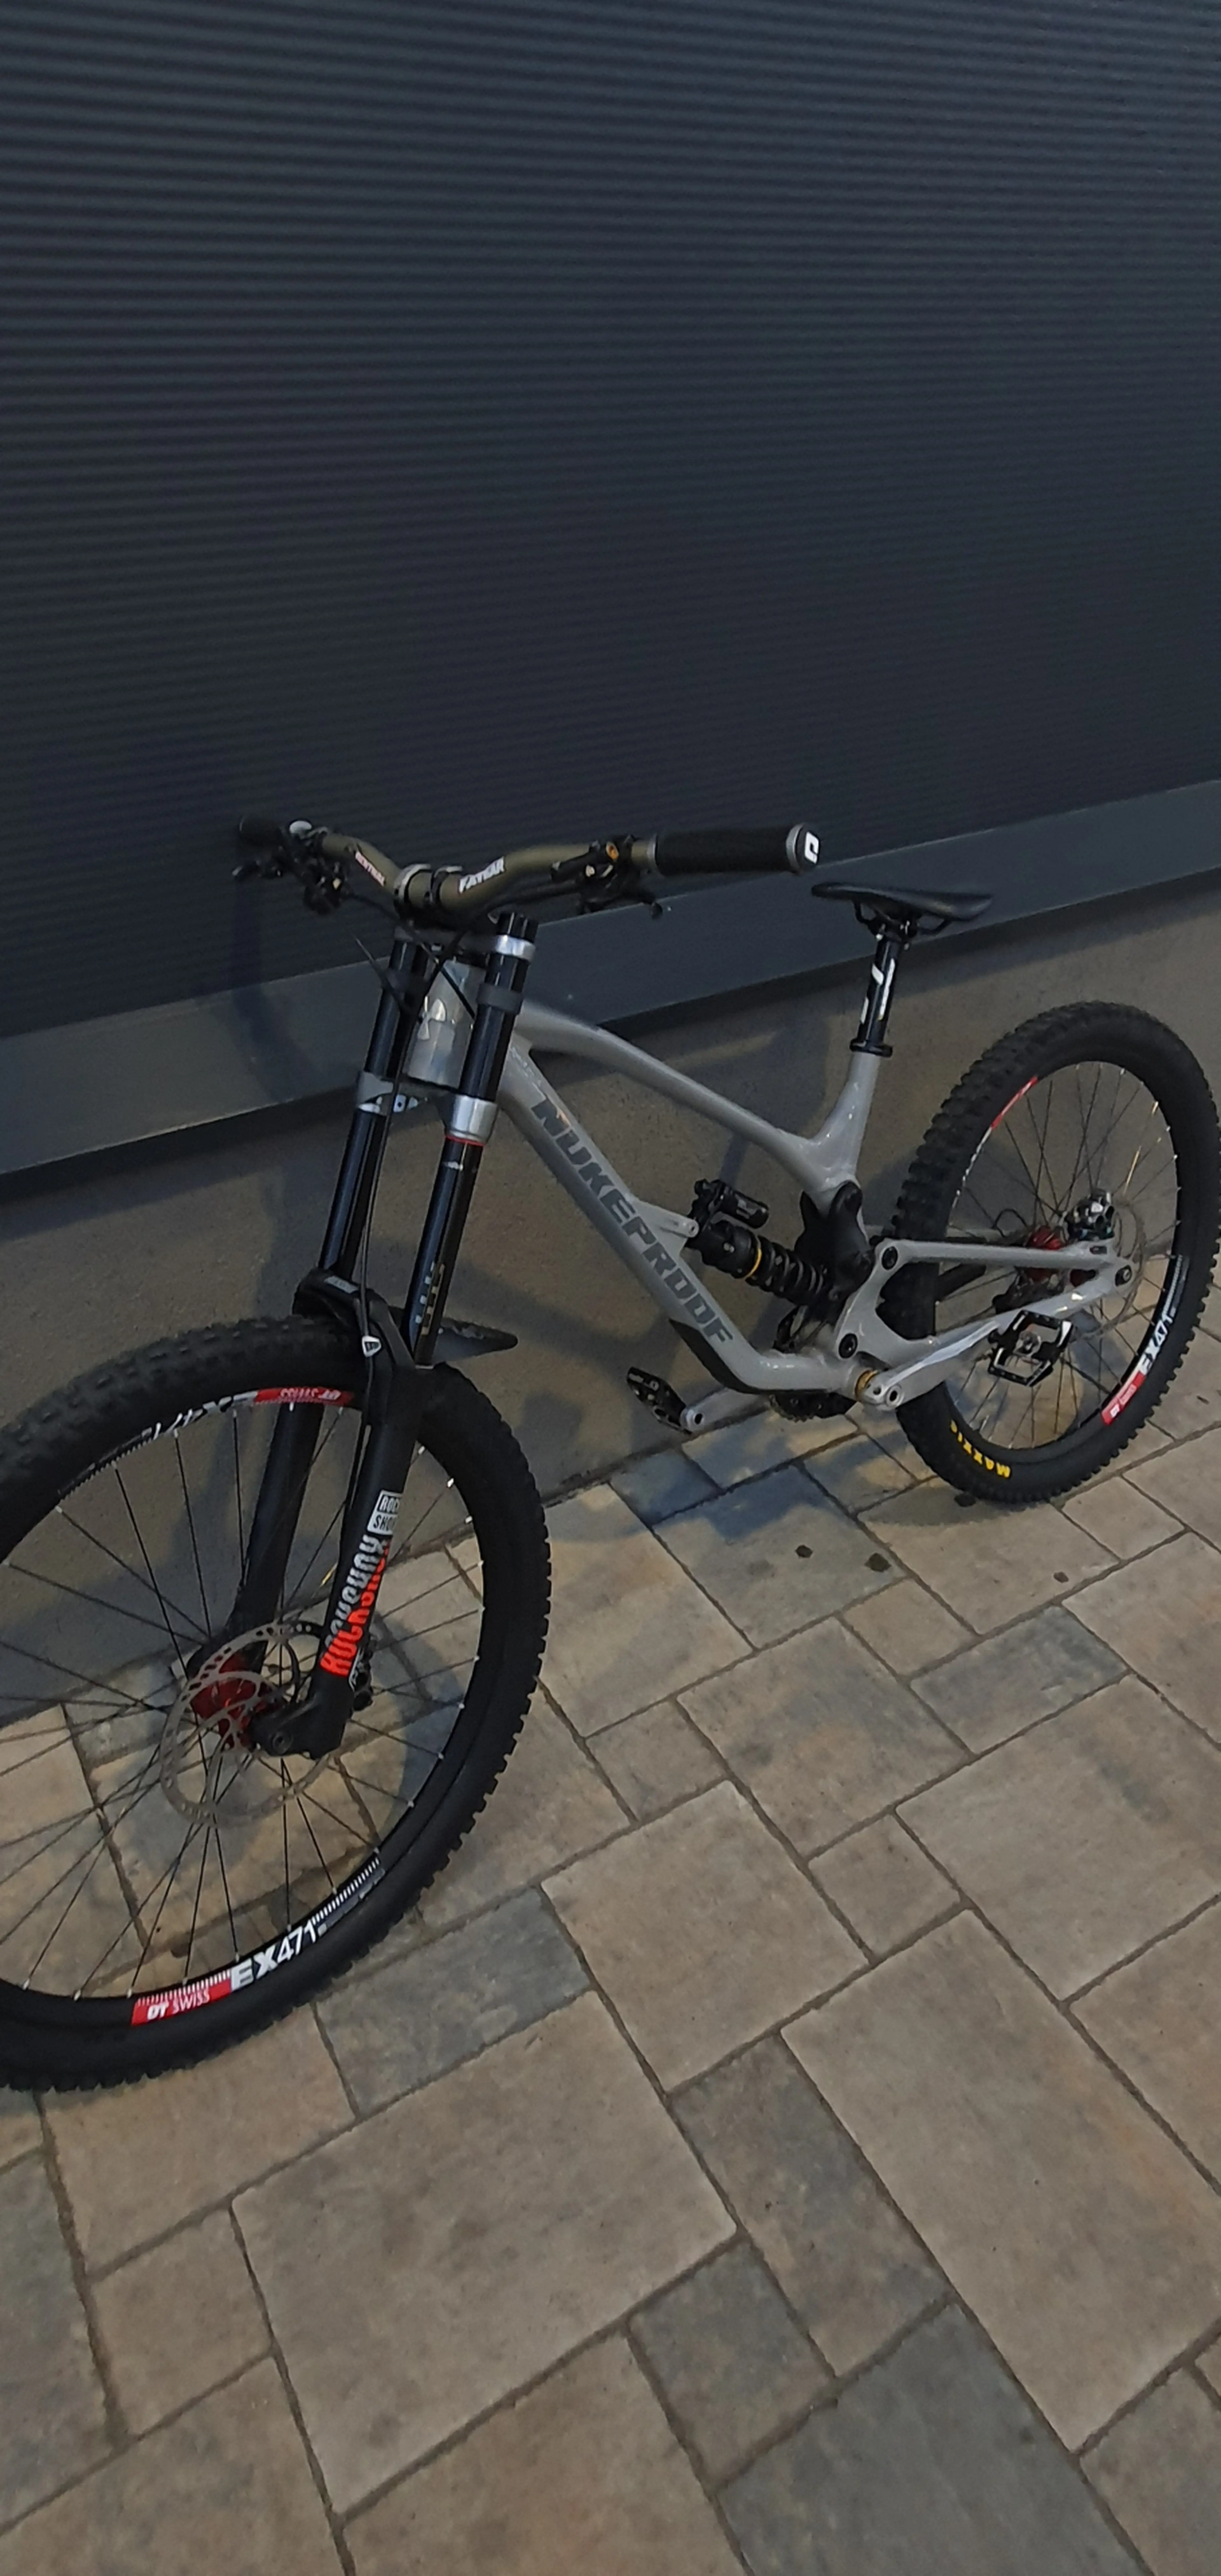 3. Nukeproof Dissent 275 Mullet